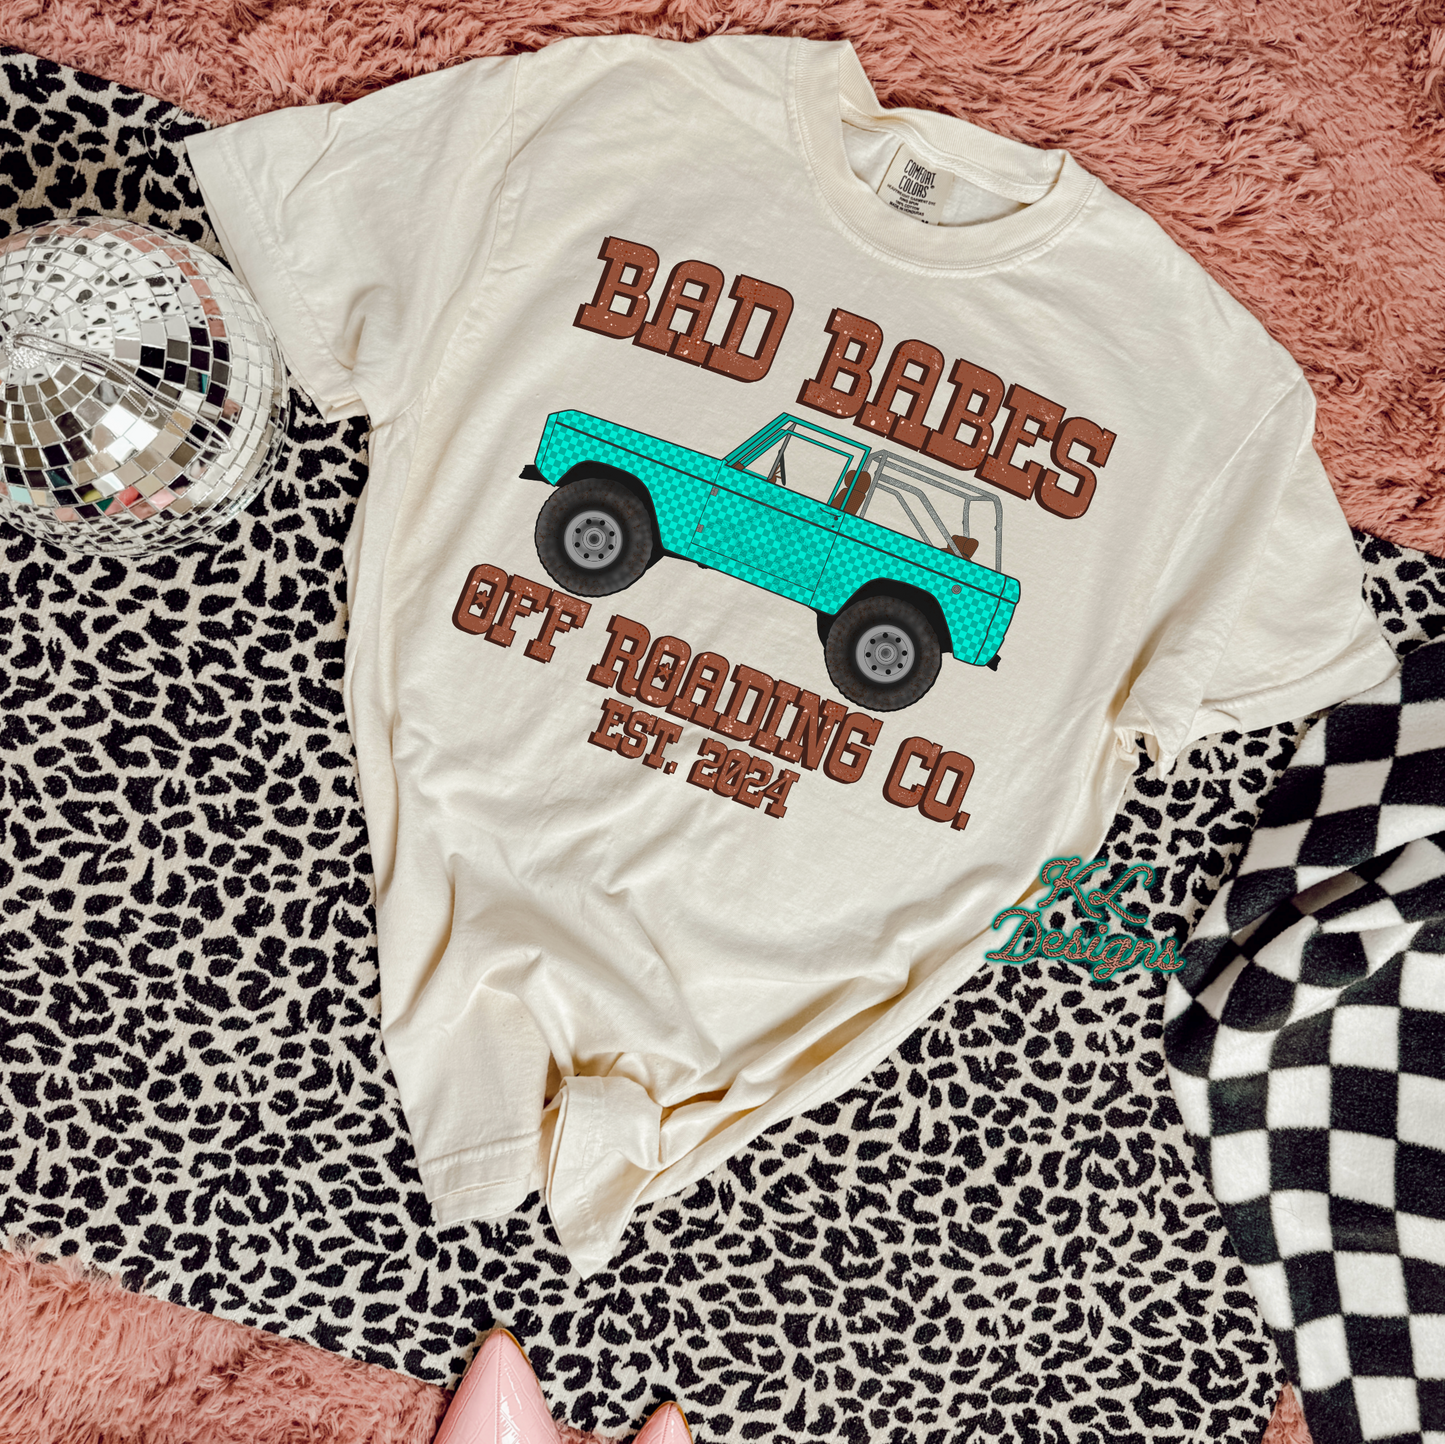 Bad Babes Off-Roading Co. - Preorder